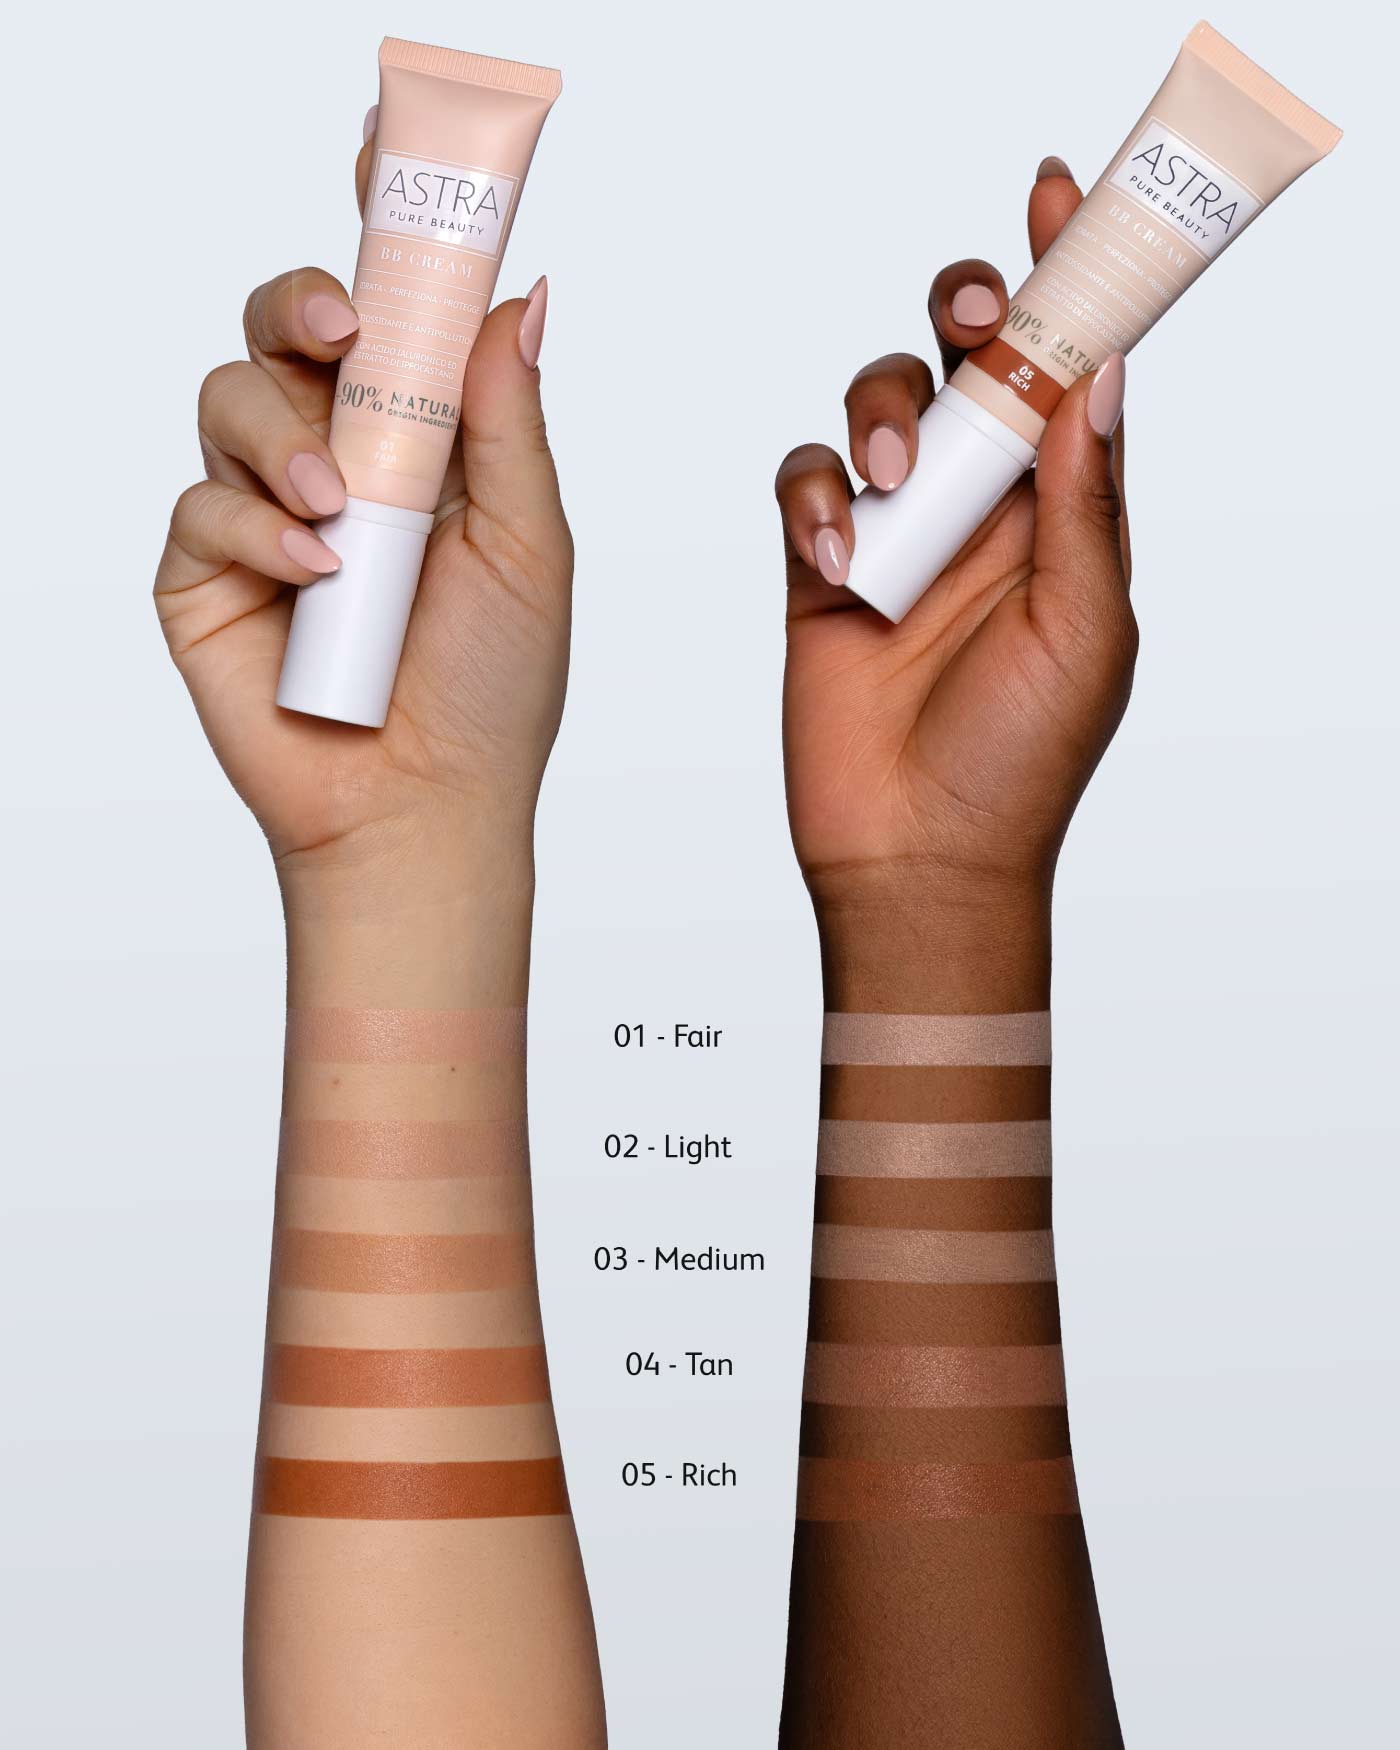 PURE BEAUTY BB CREAM - 05 - Rich - Astra Make-Up